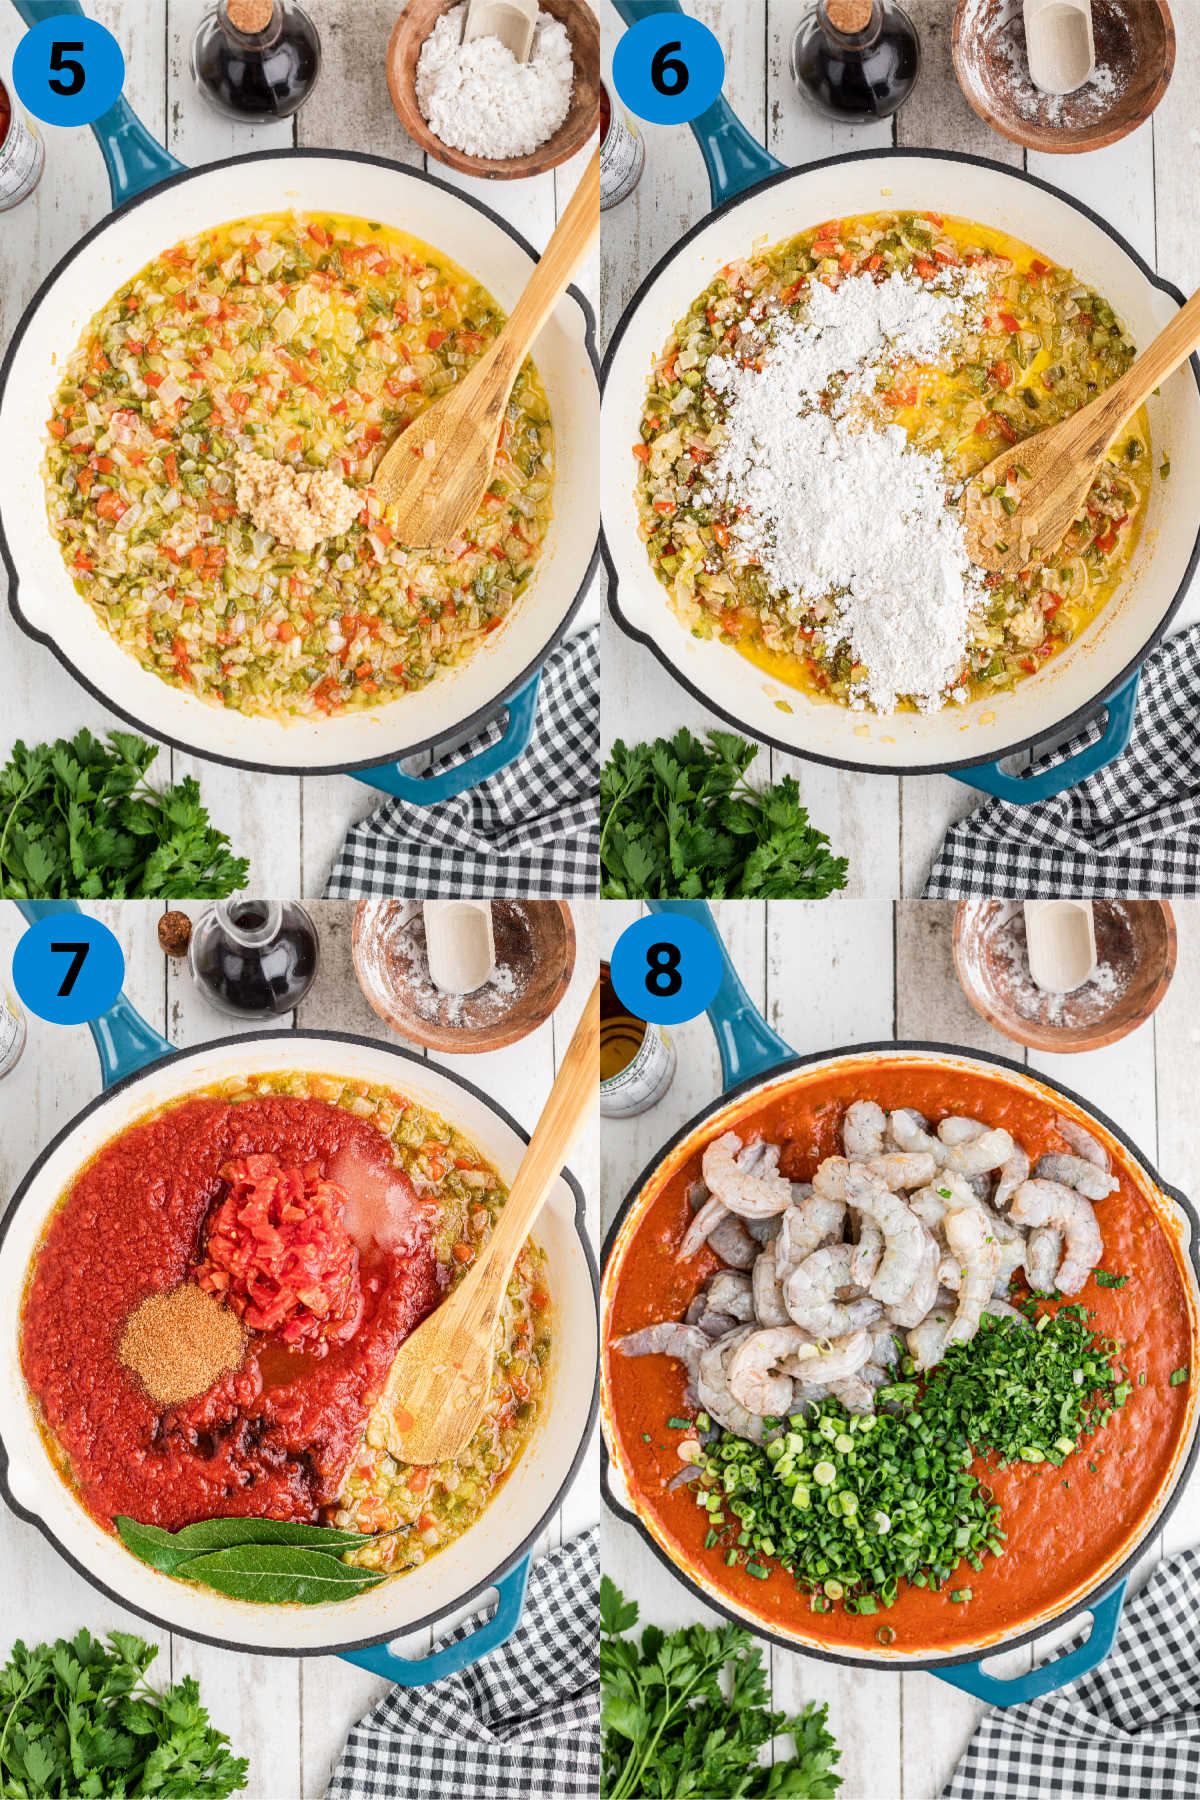 A collage of four images showing how to make New Orleans Shrimp Creole recipe steps 5 through 8.